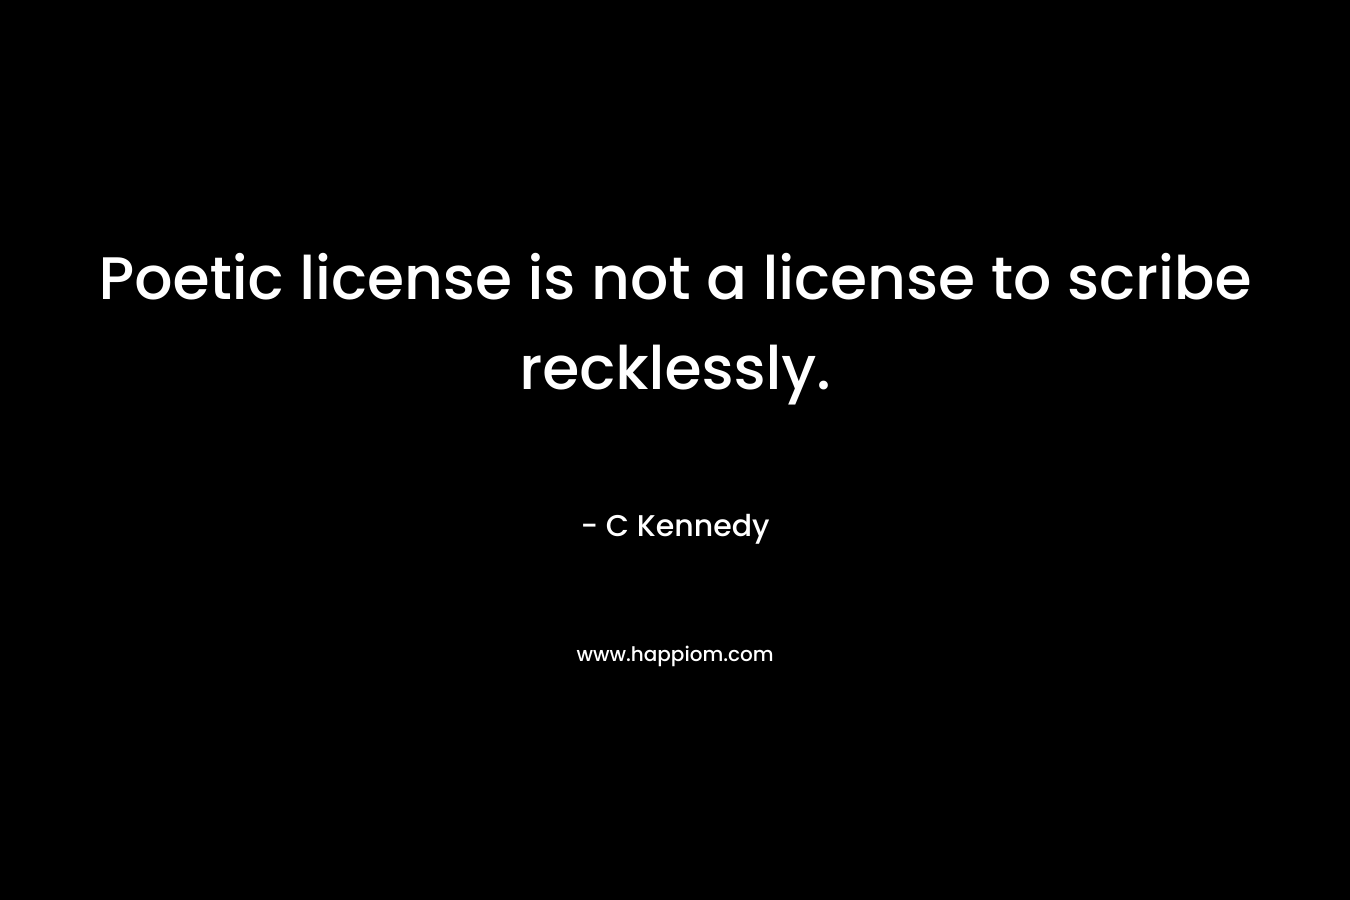 Poetic license is not a license to scribe recklessly. – C Kennedy